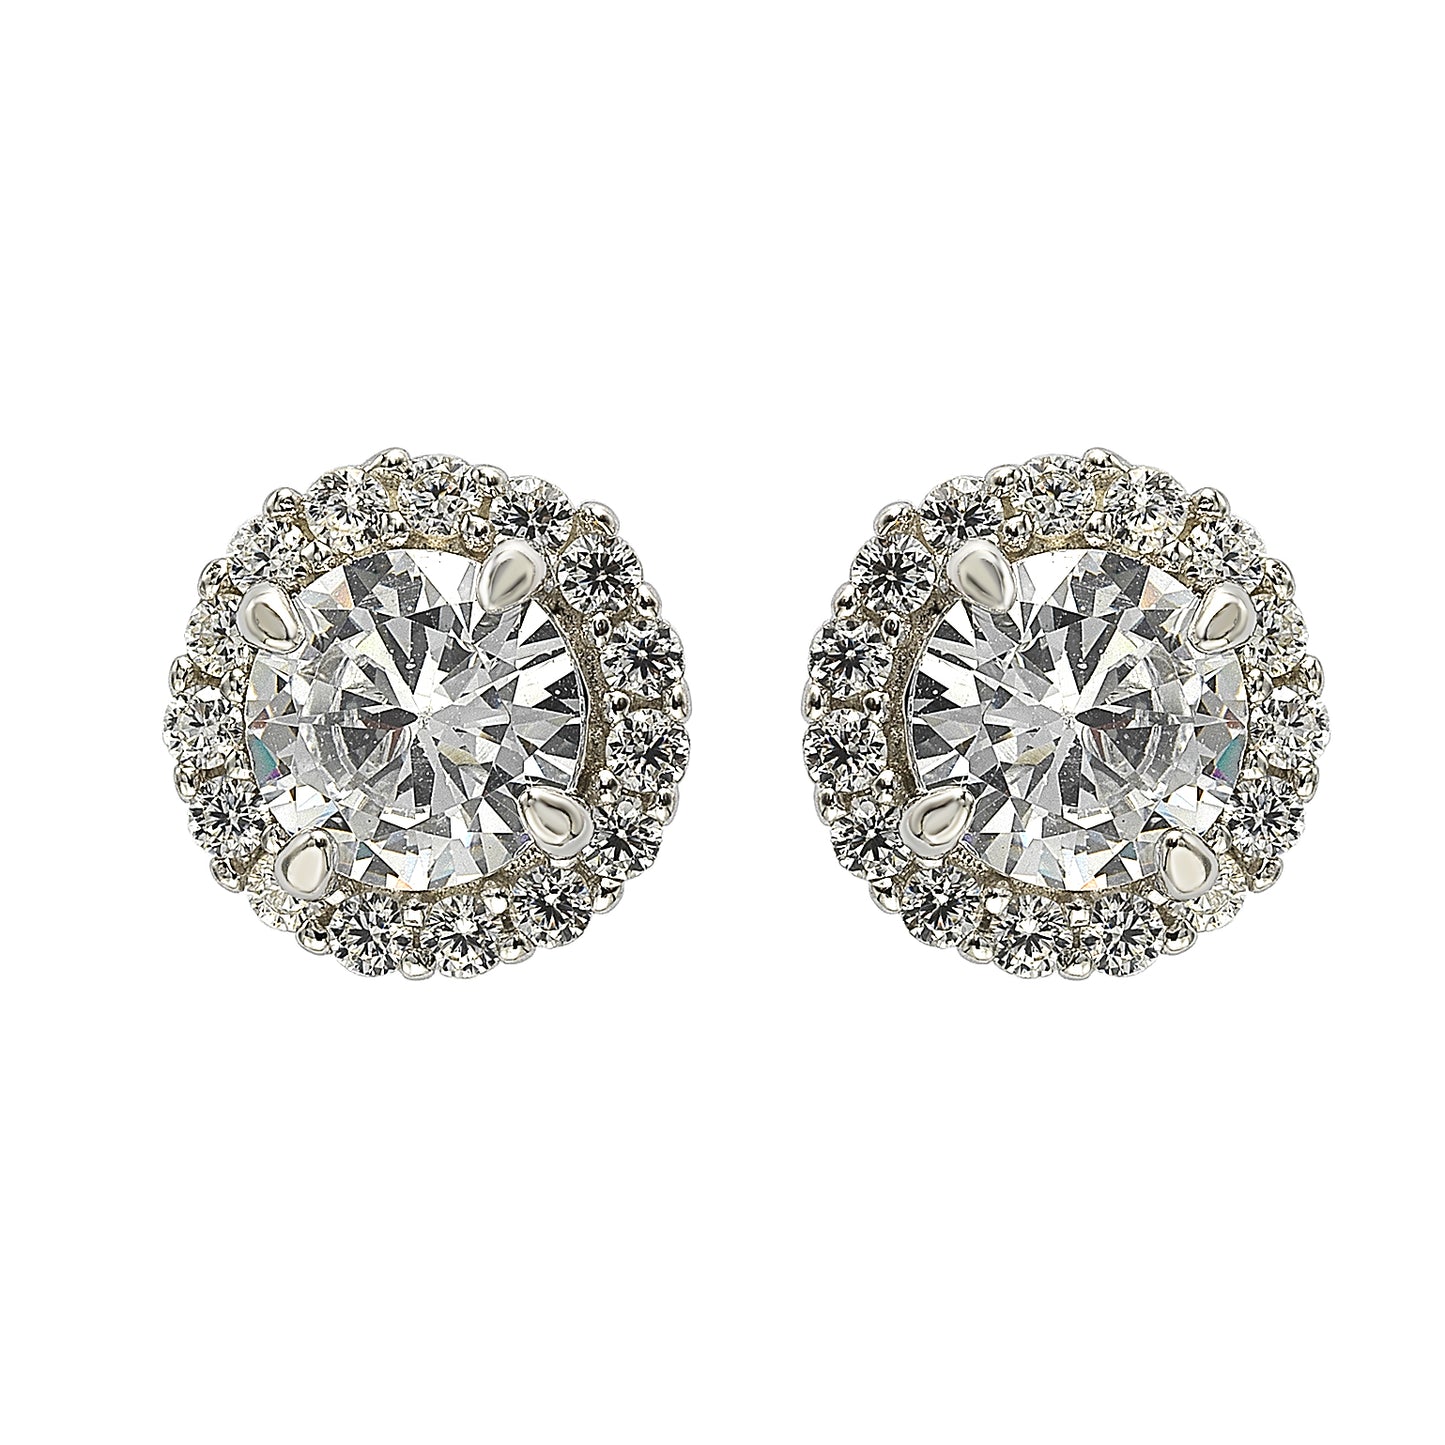 Suzy Levian Sterling Silver White Cubic Zirconia Round-Cut Halo Stud Earrings